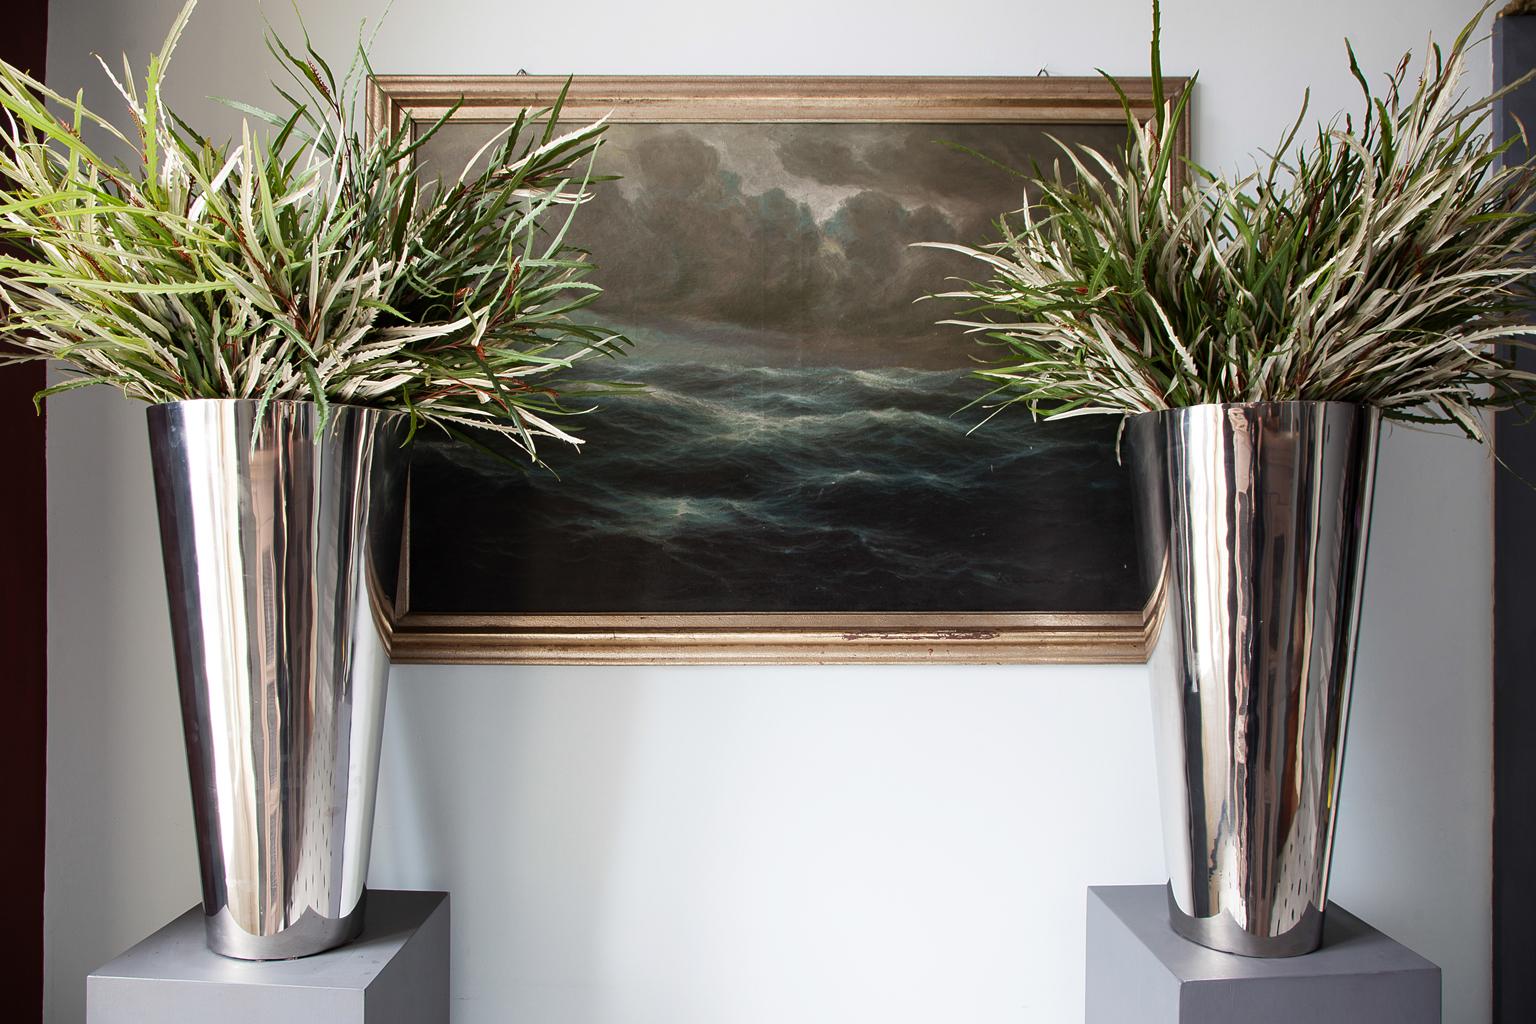 The mirrored surfaces of this pair of stunning metal chrome cylinder vases, give a touch of light into a room. They can be filled with green branches or flowers and  they suddendly become an eye- catching in every room.
They can match perfectly in